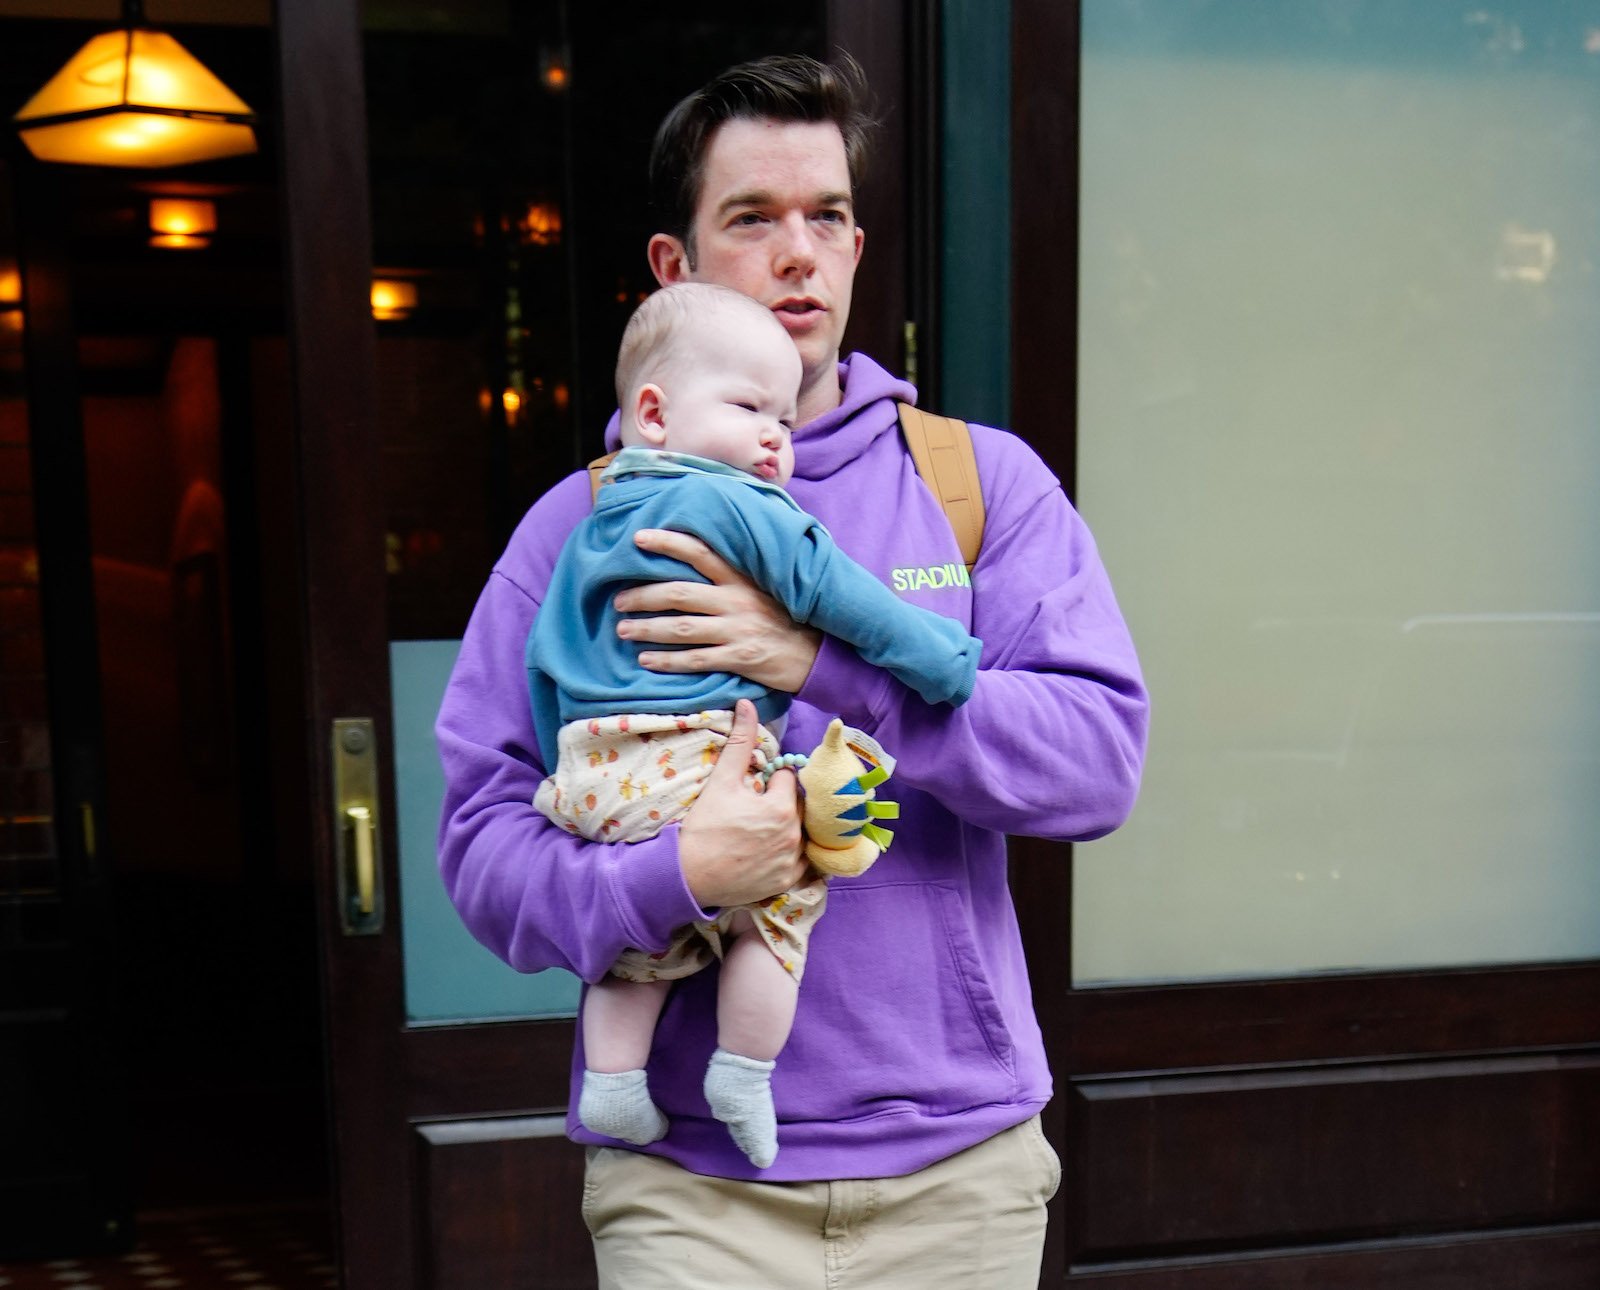 John Mulaney leaves a hotel while holding his infant son